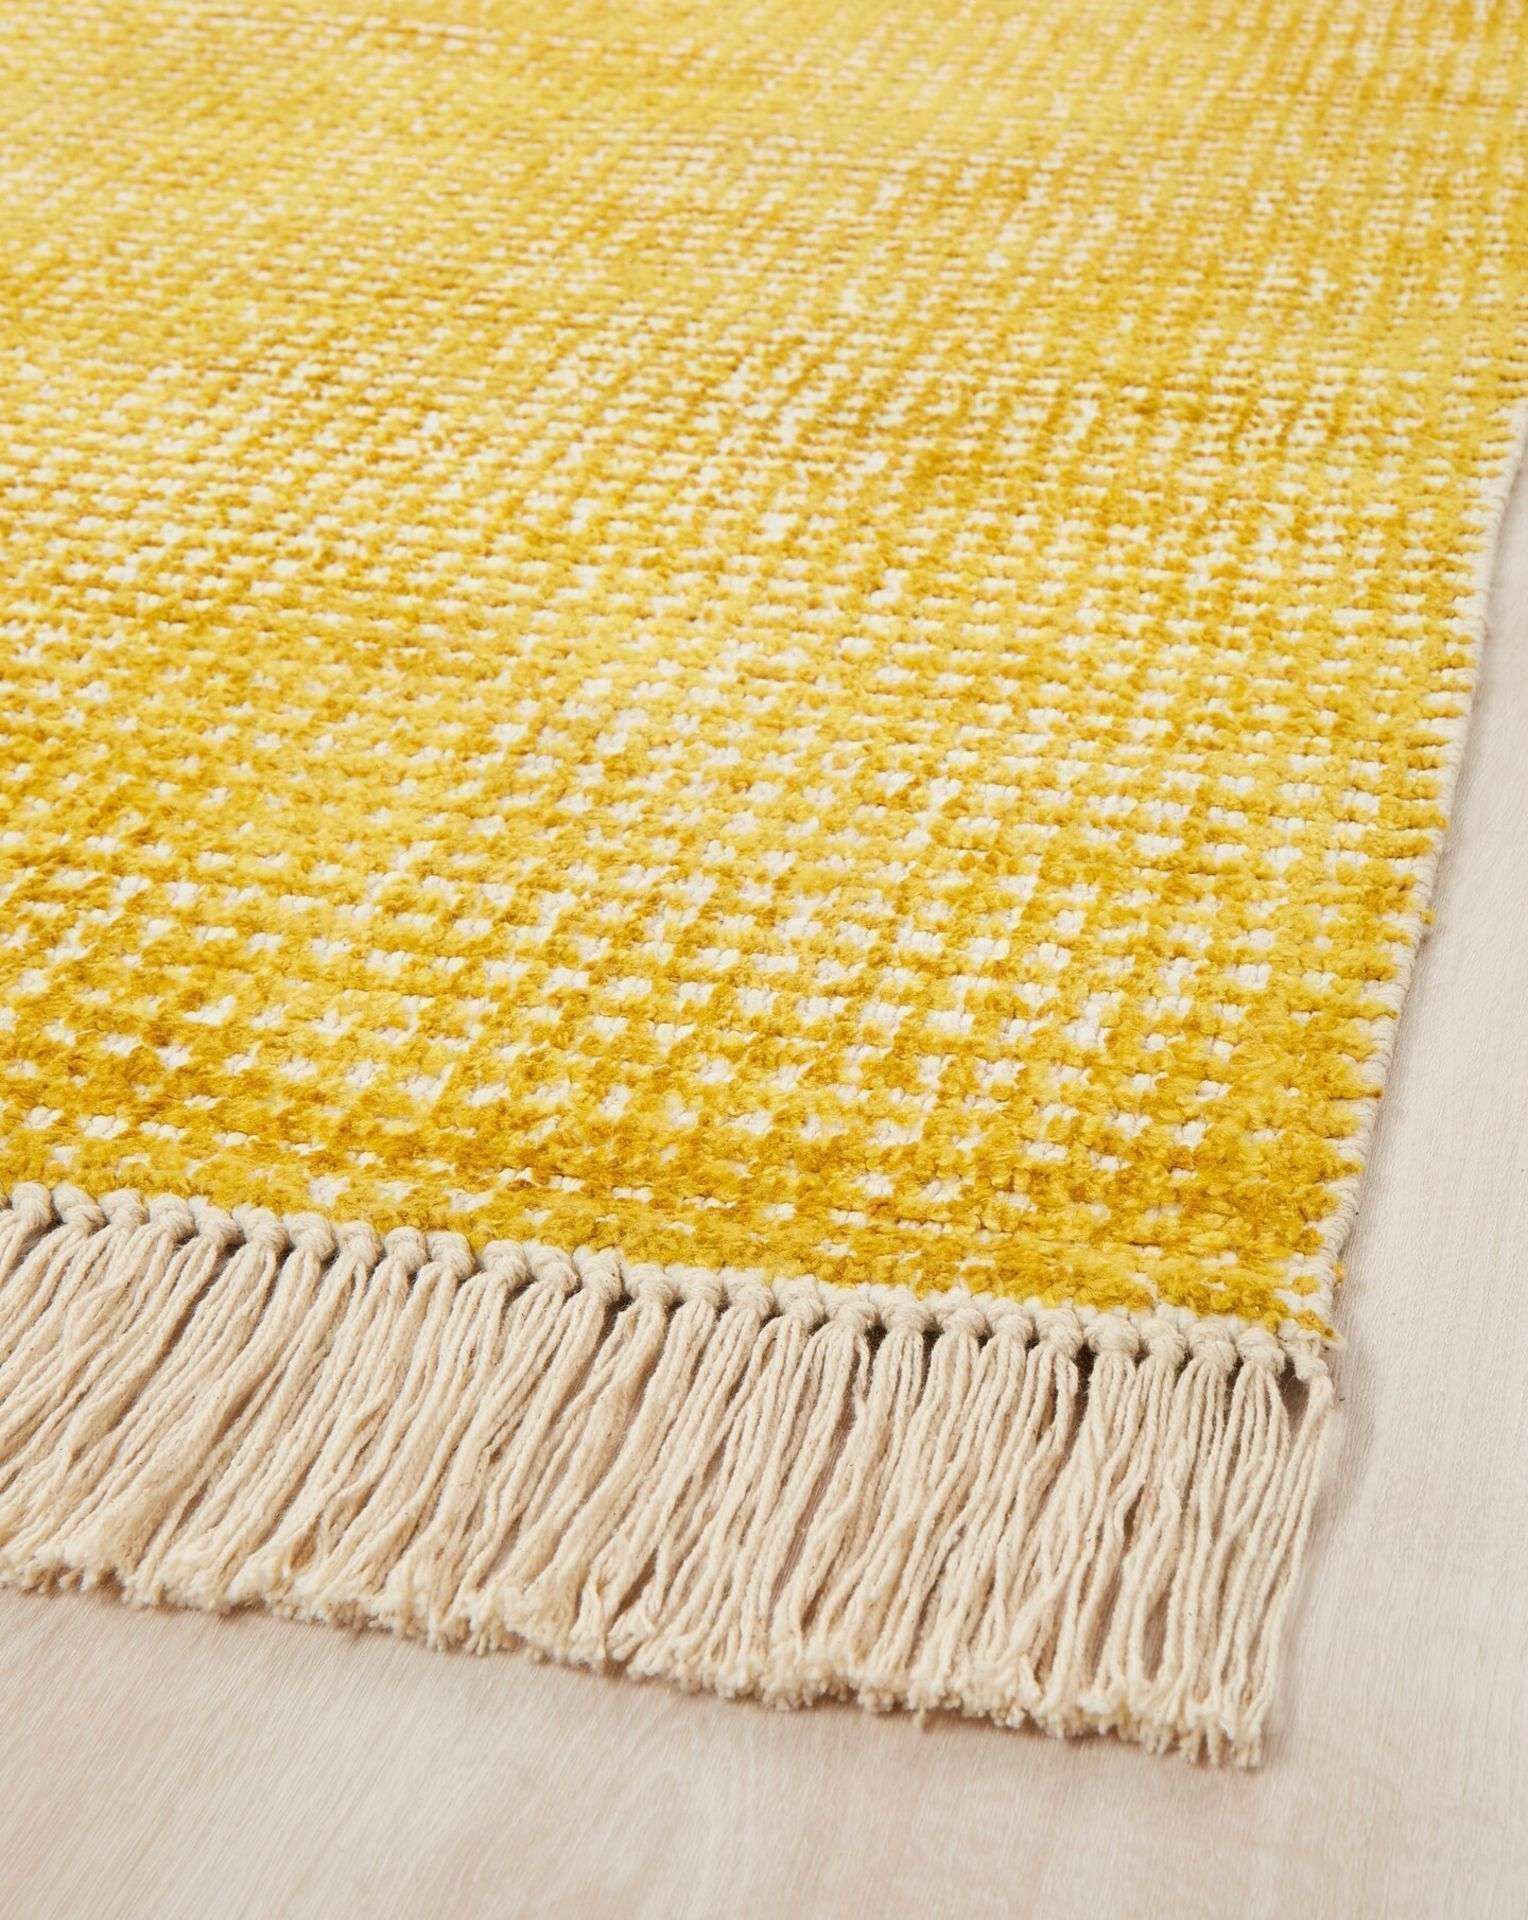 3 X BRAND NEW NUGGET GOLD HALLIE FRINGE RUGS SIZE 120 X 170CM R15-4 - Image 2 of 2